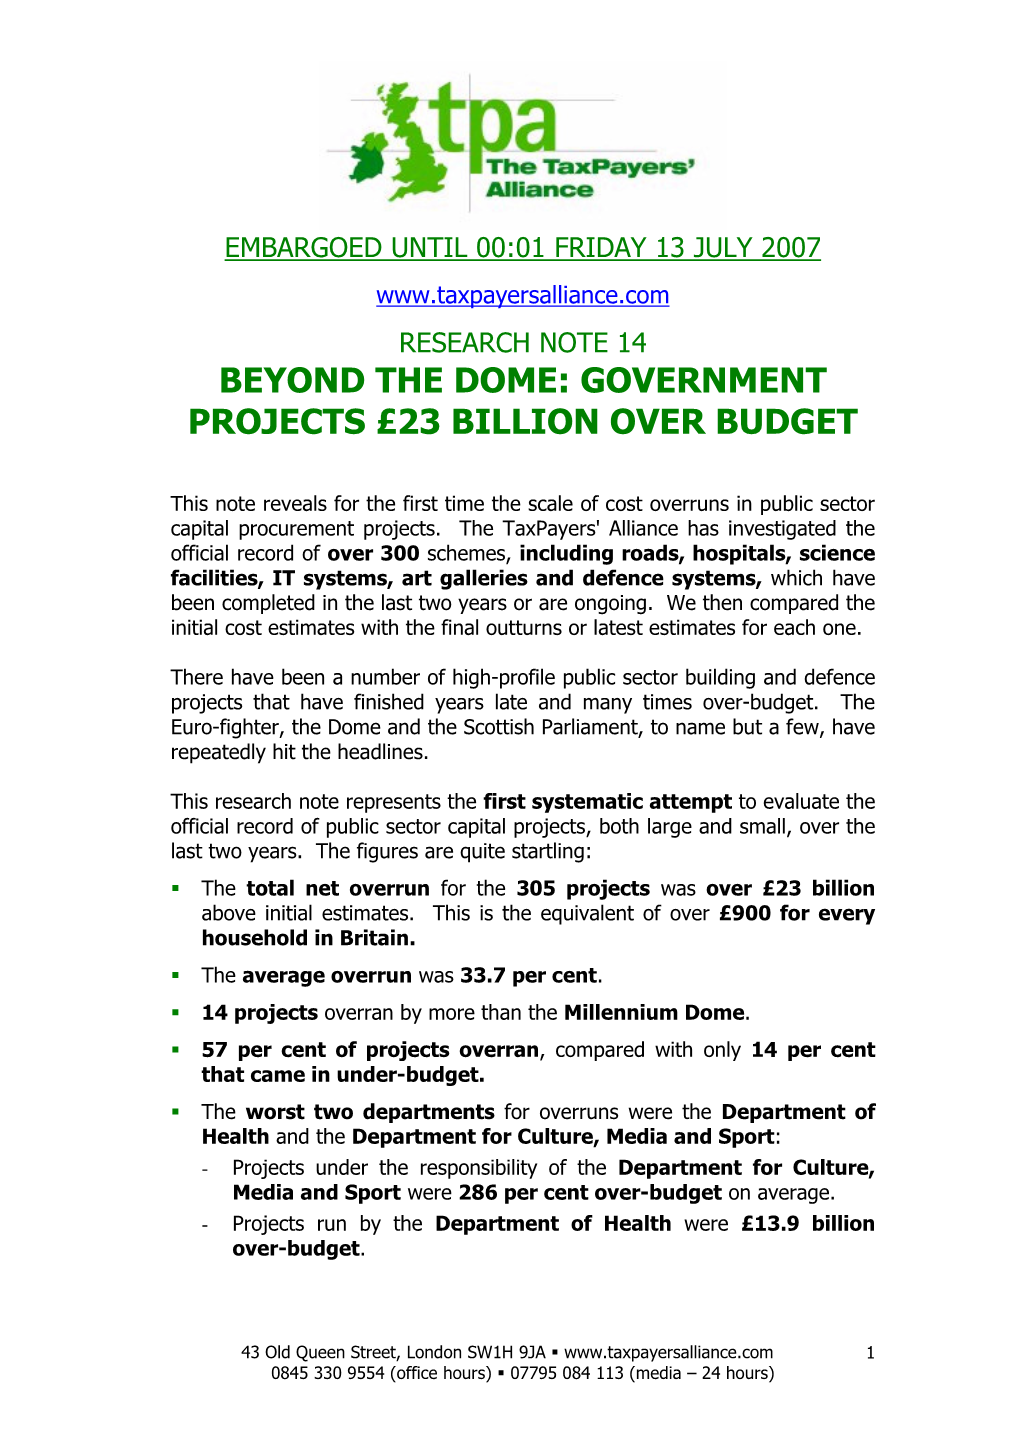 Beyond the Dome: Government Projects £23 Billion Over Budget